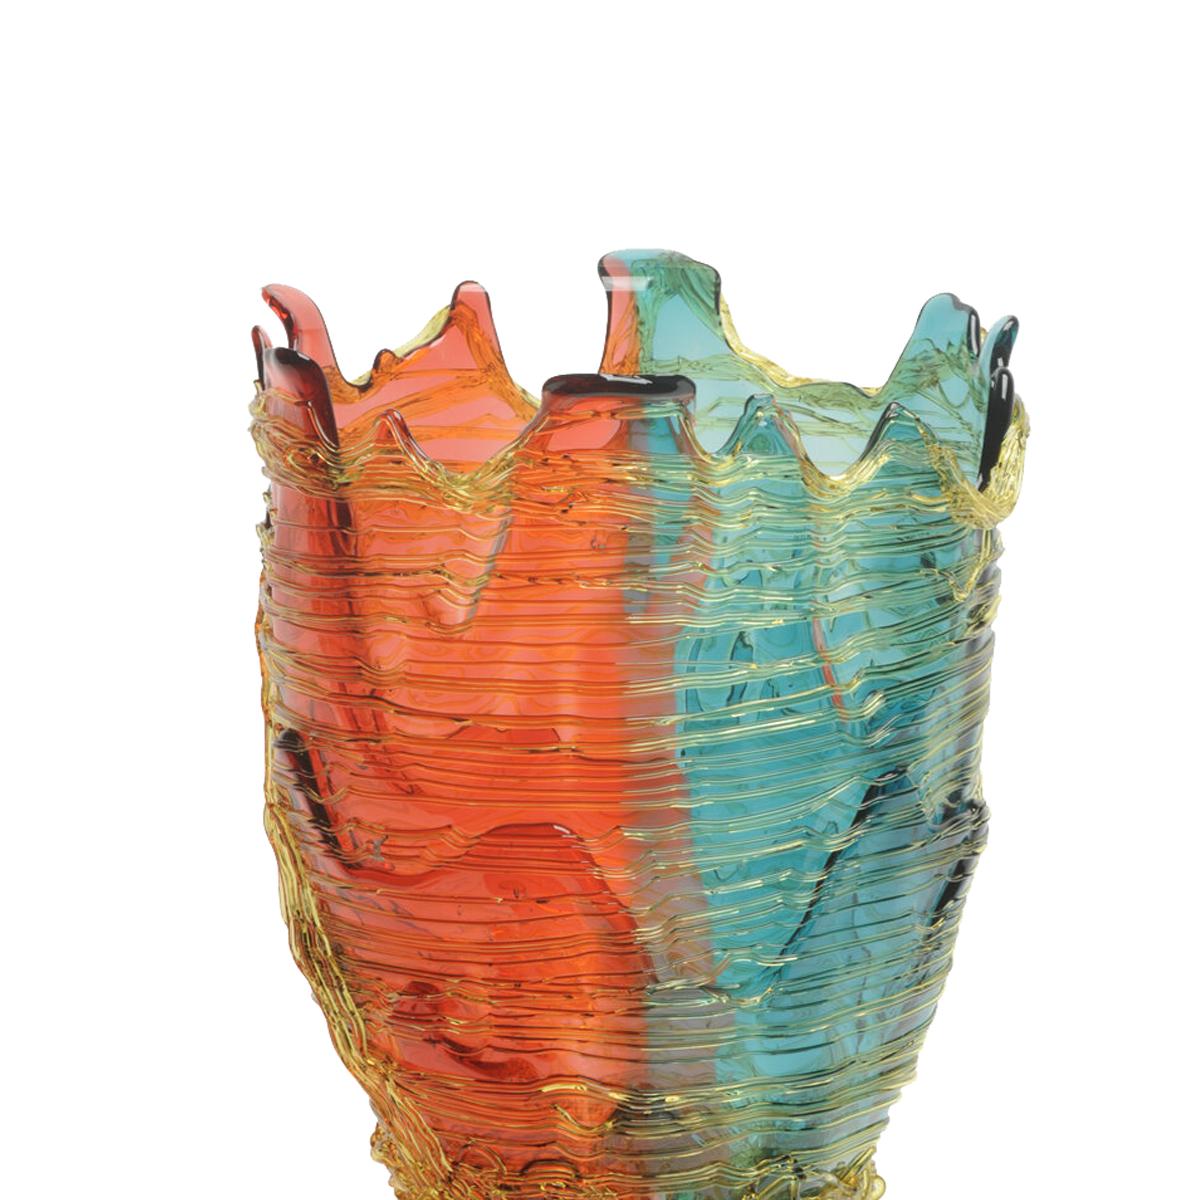 Spaghetti color vase, clear fuchsia, aqua and amber

Vase in soft resin designed by Gaetano Pesce in 1995 for Fish Design collection.

Measures: XL Ø 30cm x H 56cm

Colour: clear fuchsia, aqua and amber
Vase in soft resin designed by Gaetano